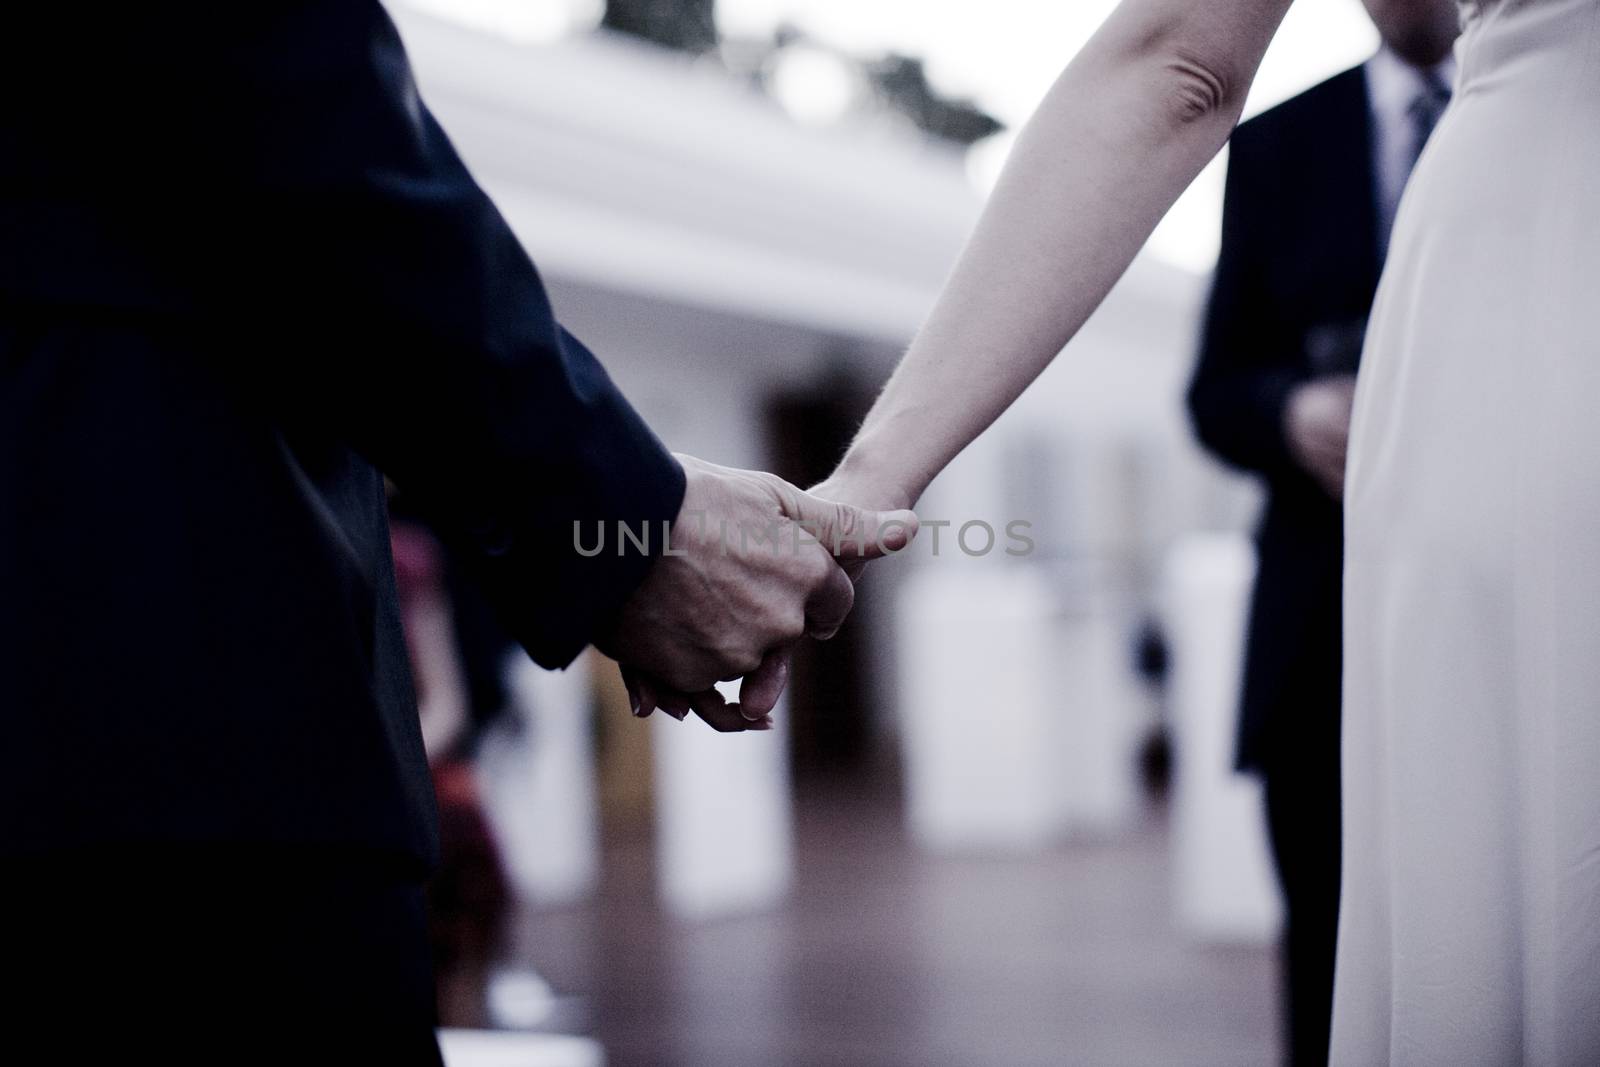 Bride and groom in wedding ceremony holding hands by edwardolive